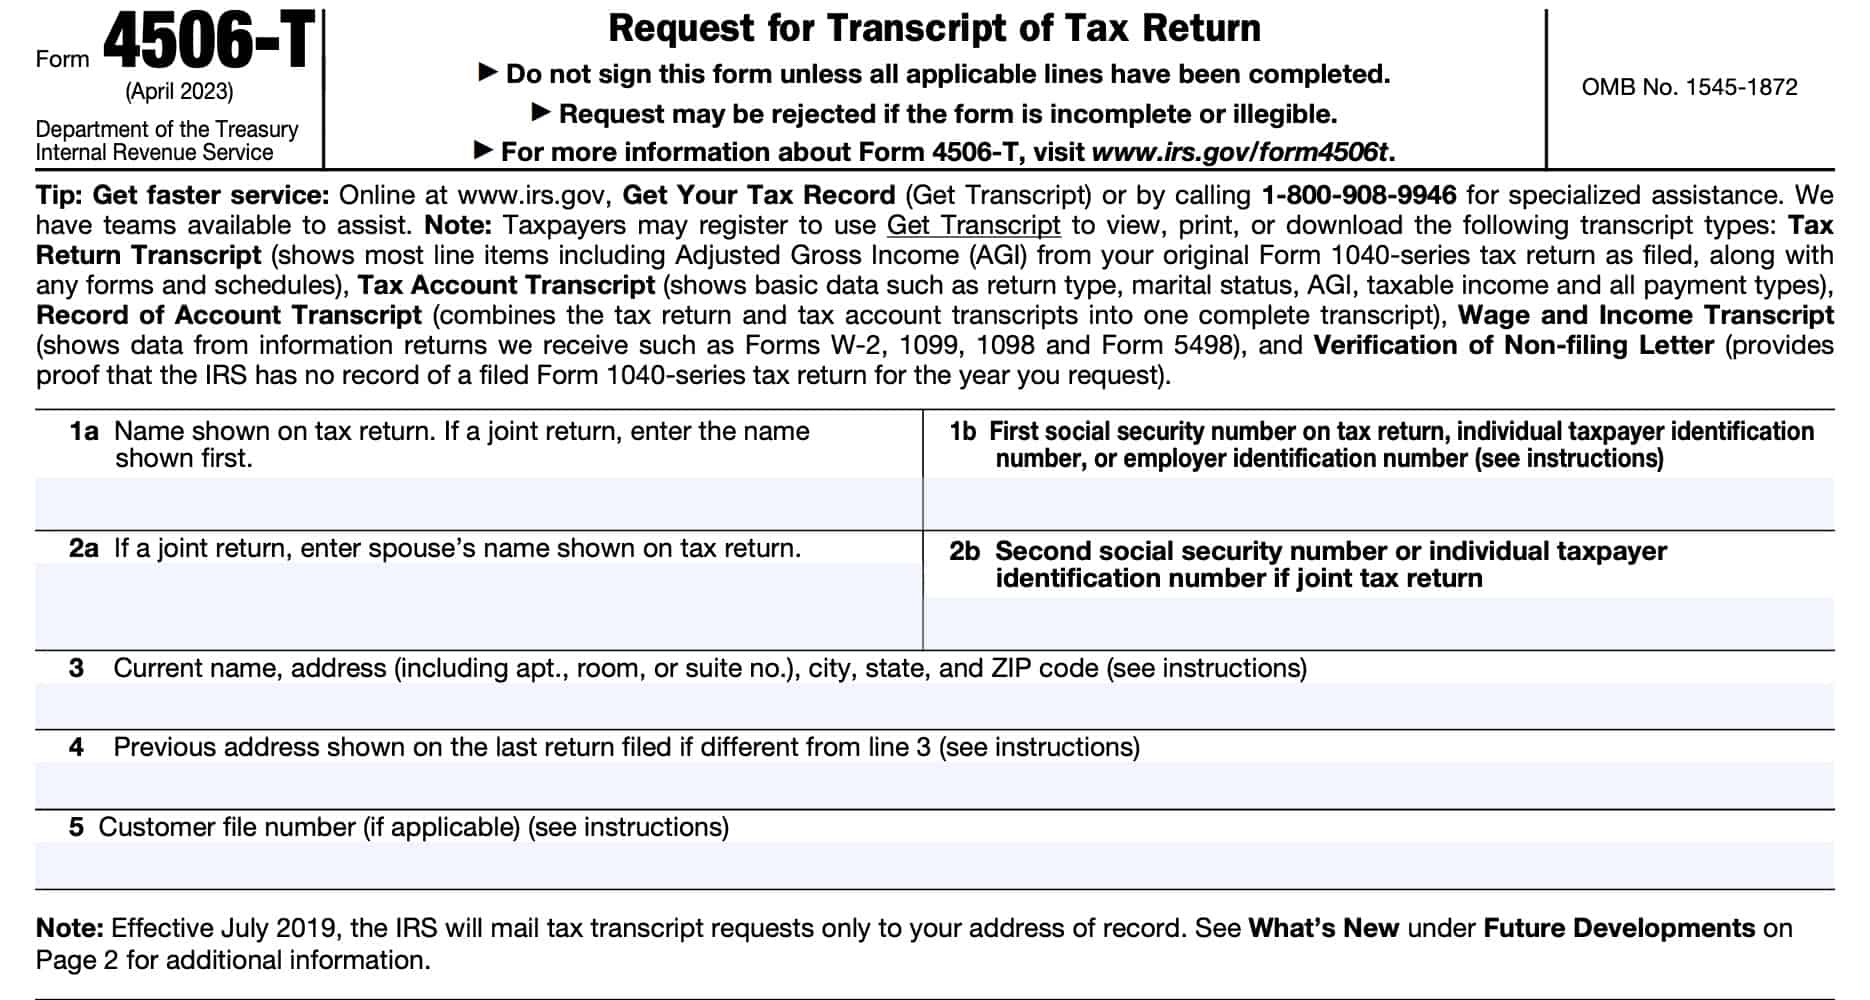 irs form 4506-T, request for transcript of tax return, taxpayer information